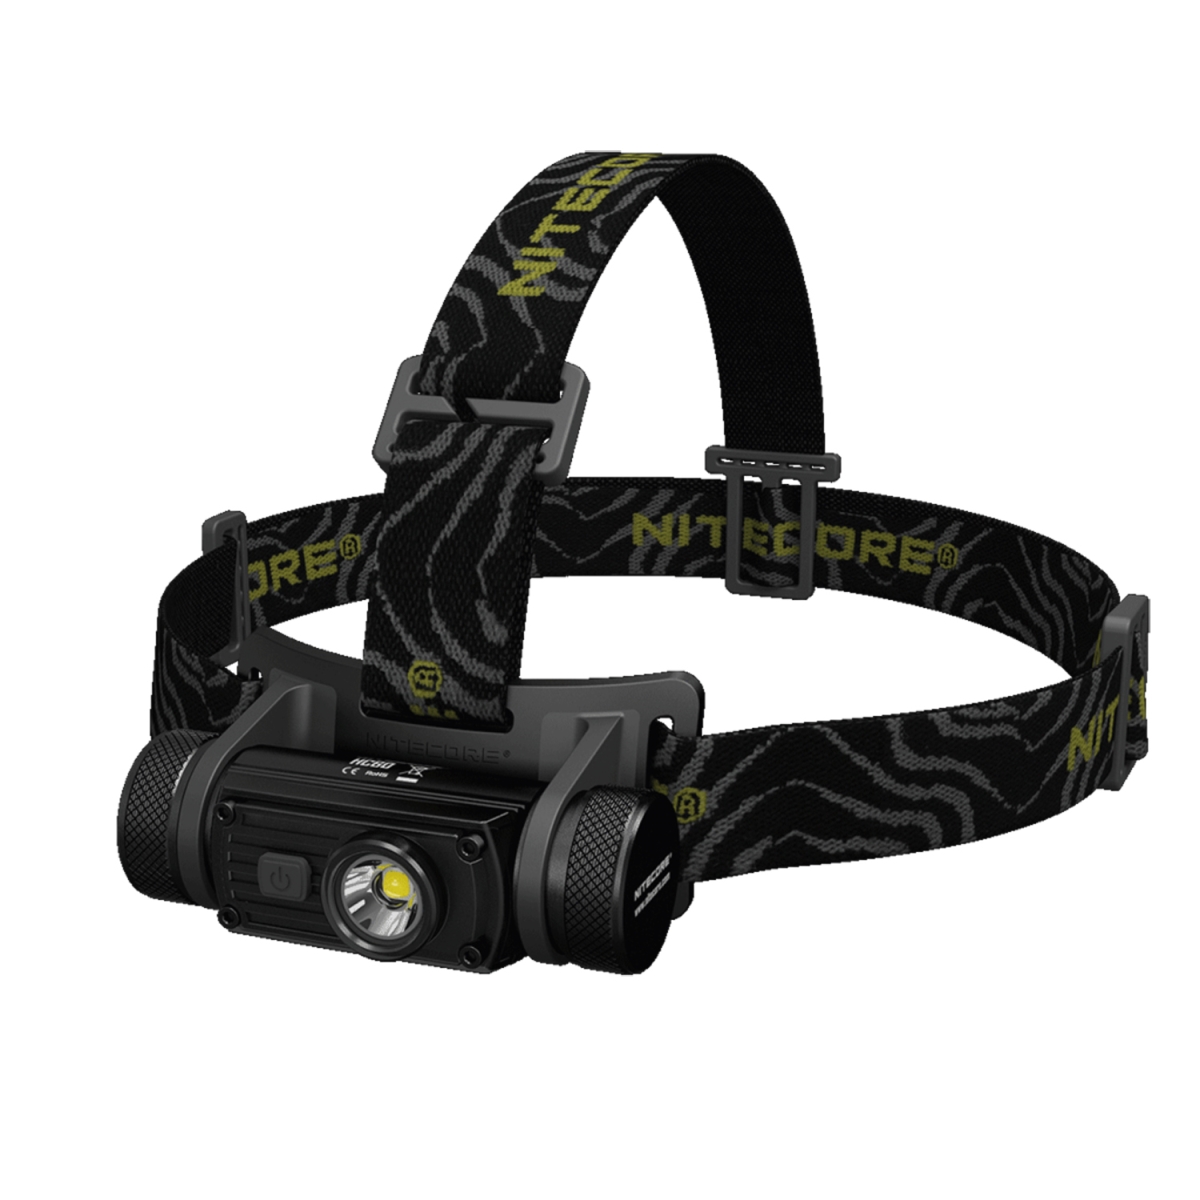 Nitecore Sysmax Industrial 9004651 Rechargeable Headlamp With Neutral White